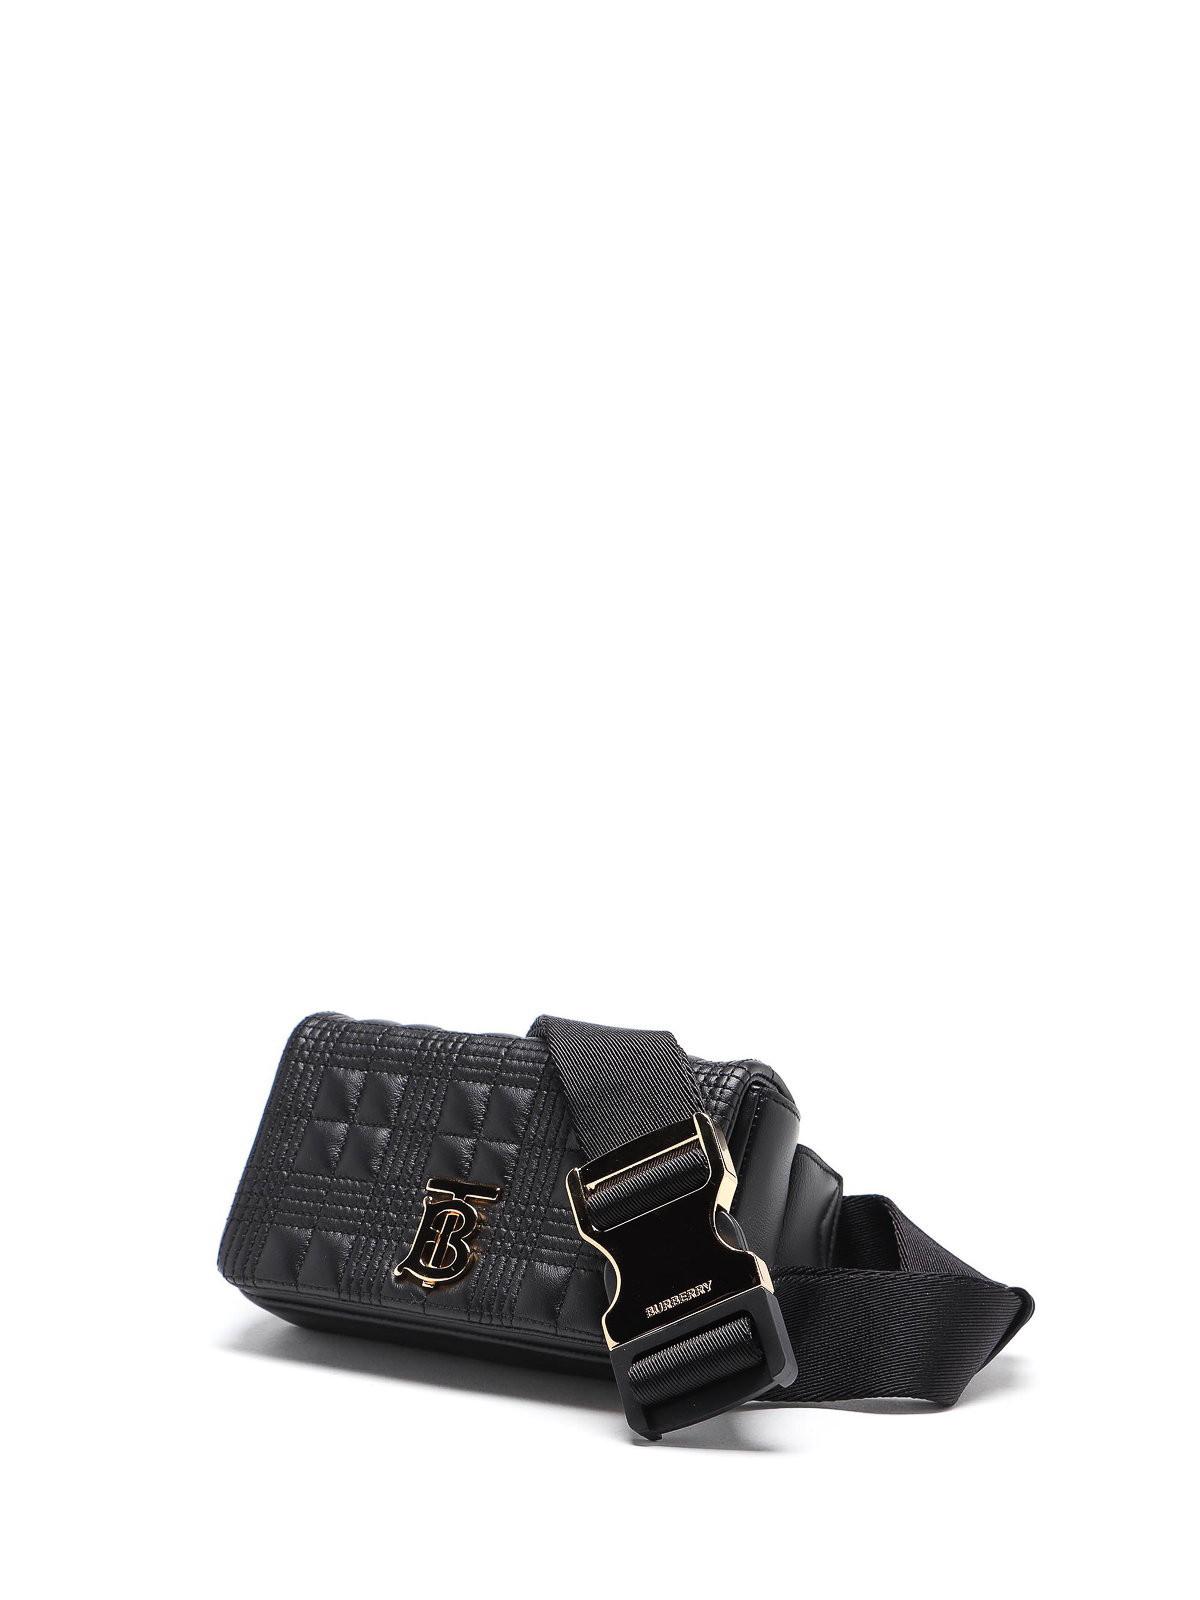 Burberry Lola Quilted Lambskin Leather Belt Bag in Black